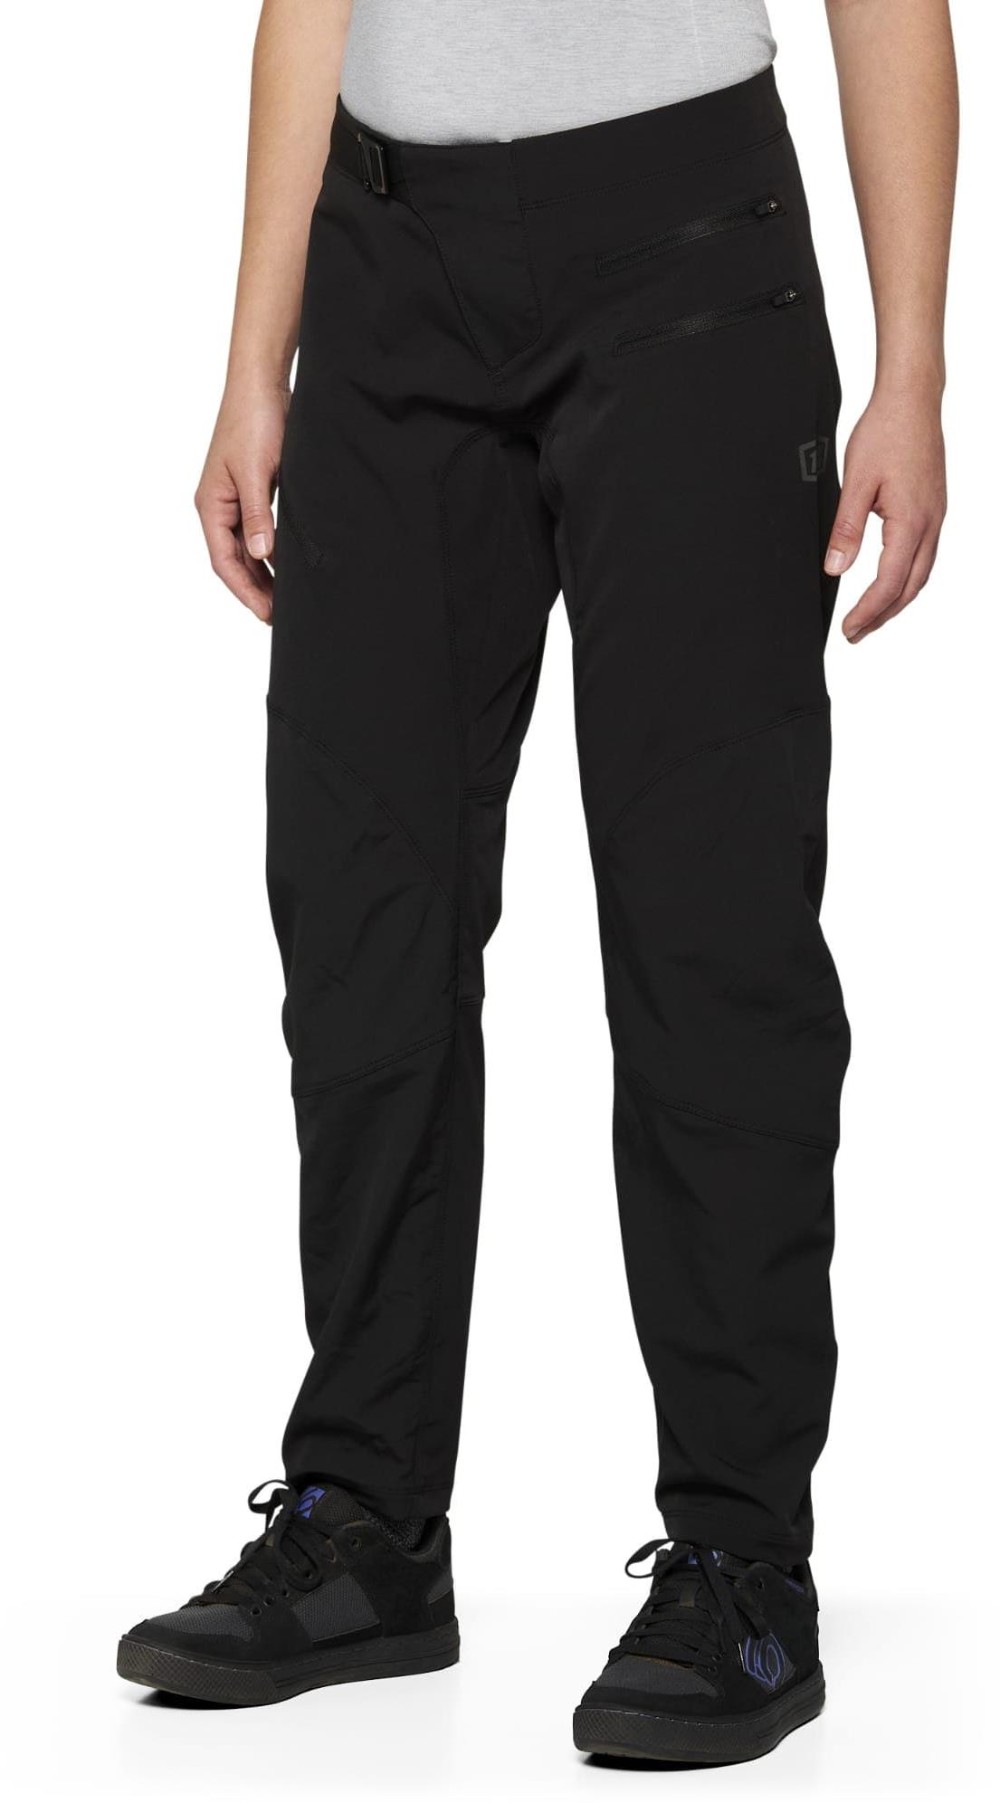 Airmatic Womens MTB Cycling Trousers image 0